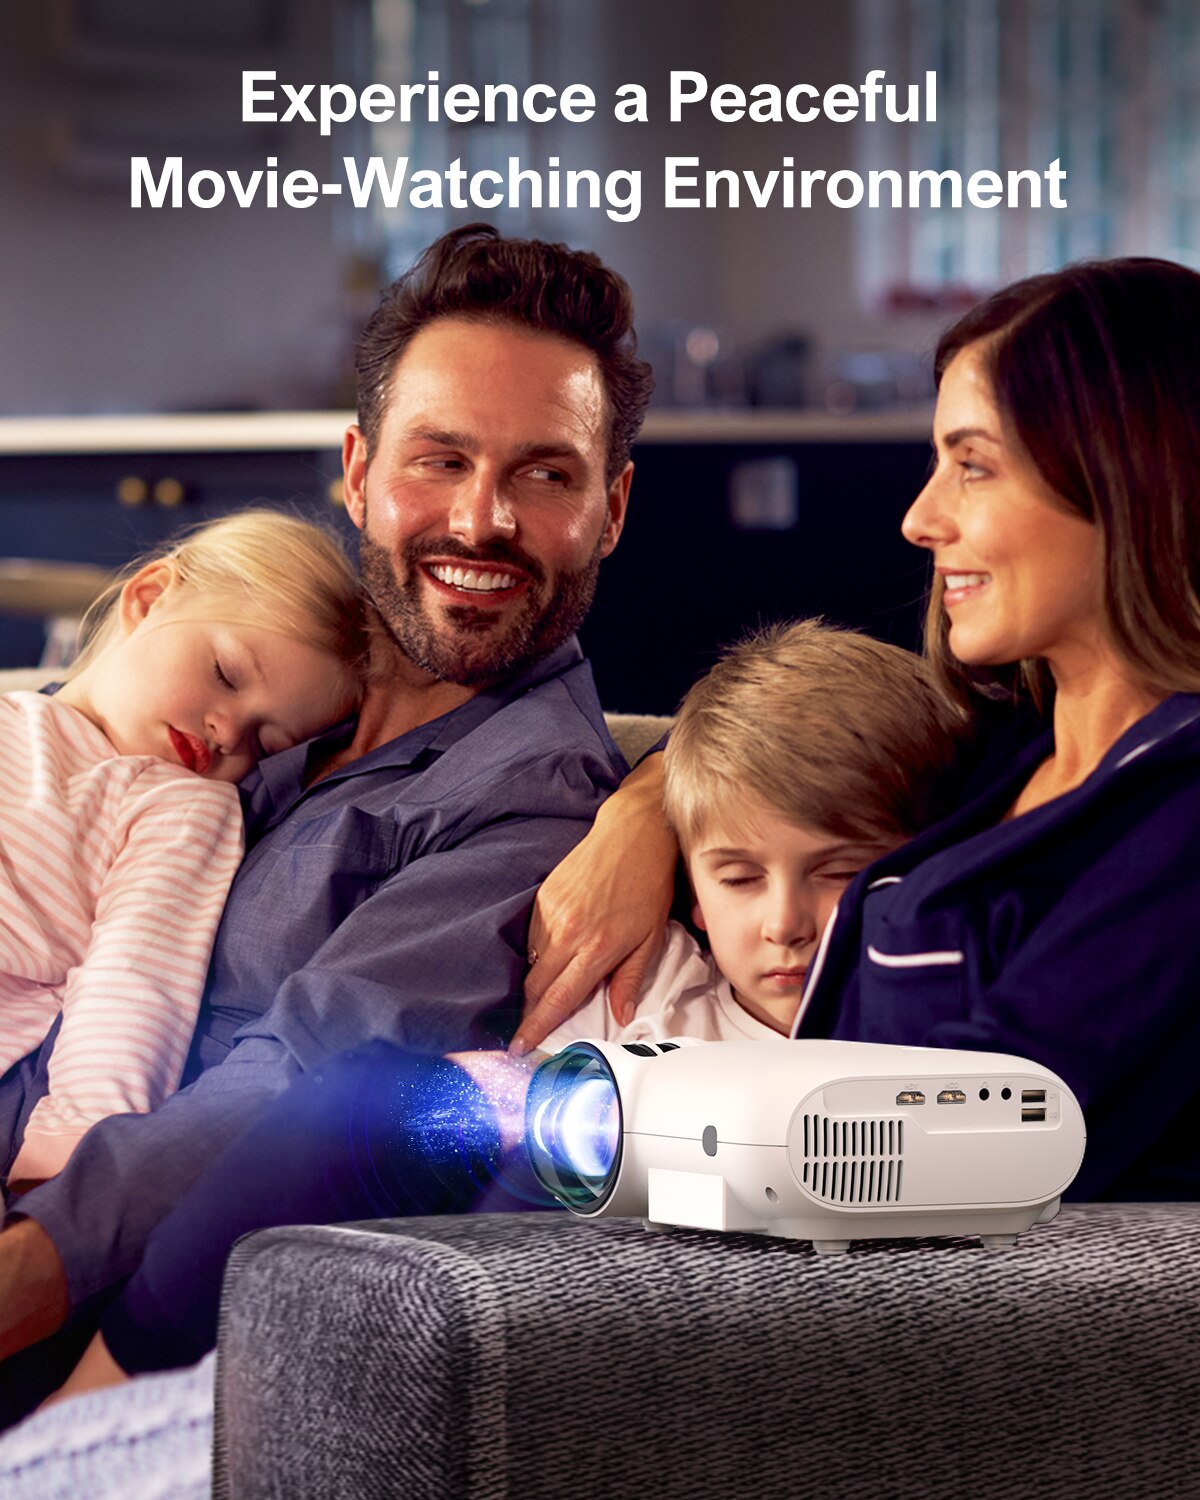 Immersive Outdoor Cinema: ULTIMEA 1080P Bluetooth Projector with 300 ANSI Lumens for Ultimate Portable Smart Home Theater